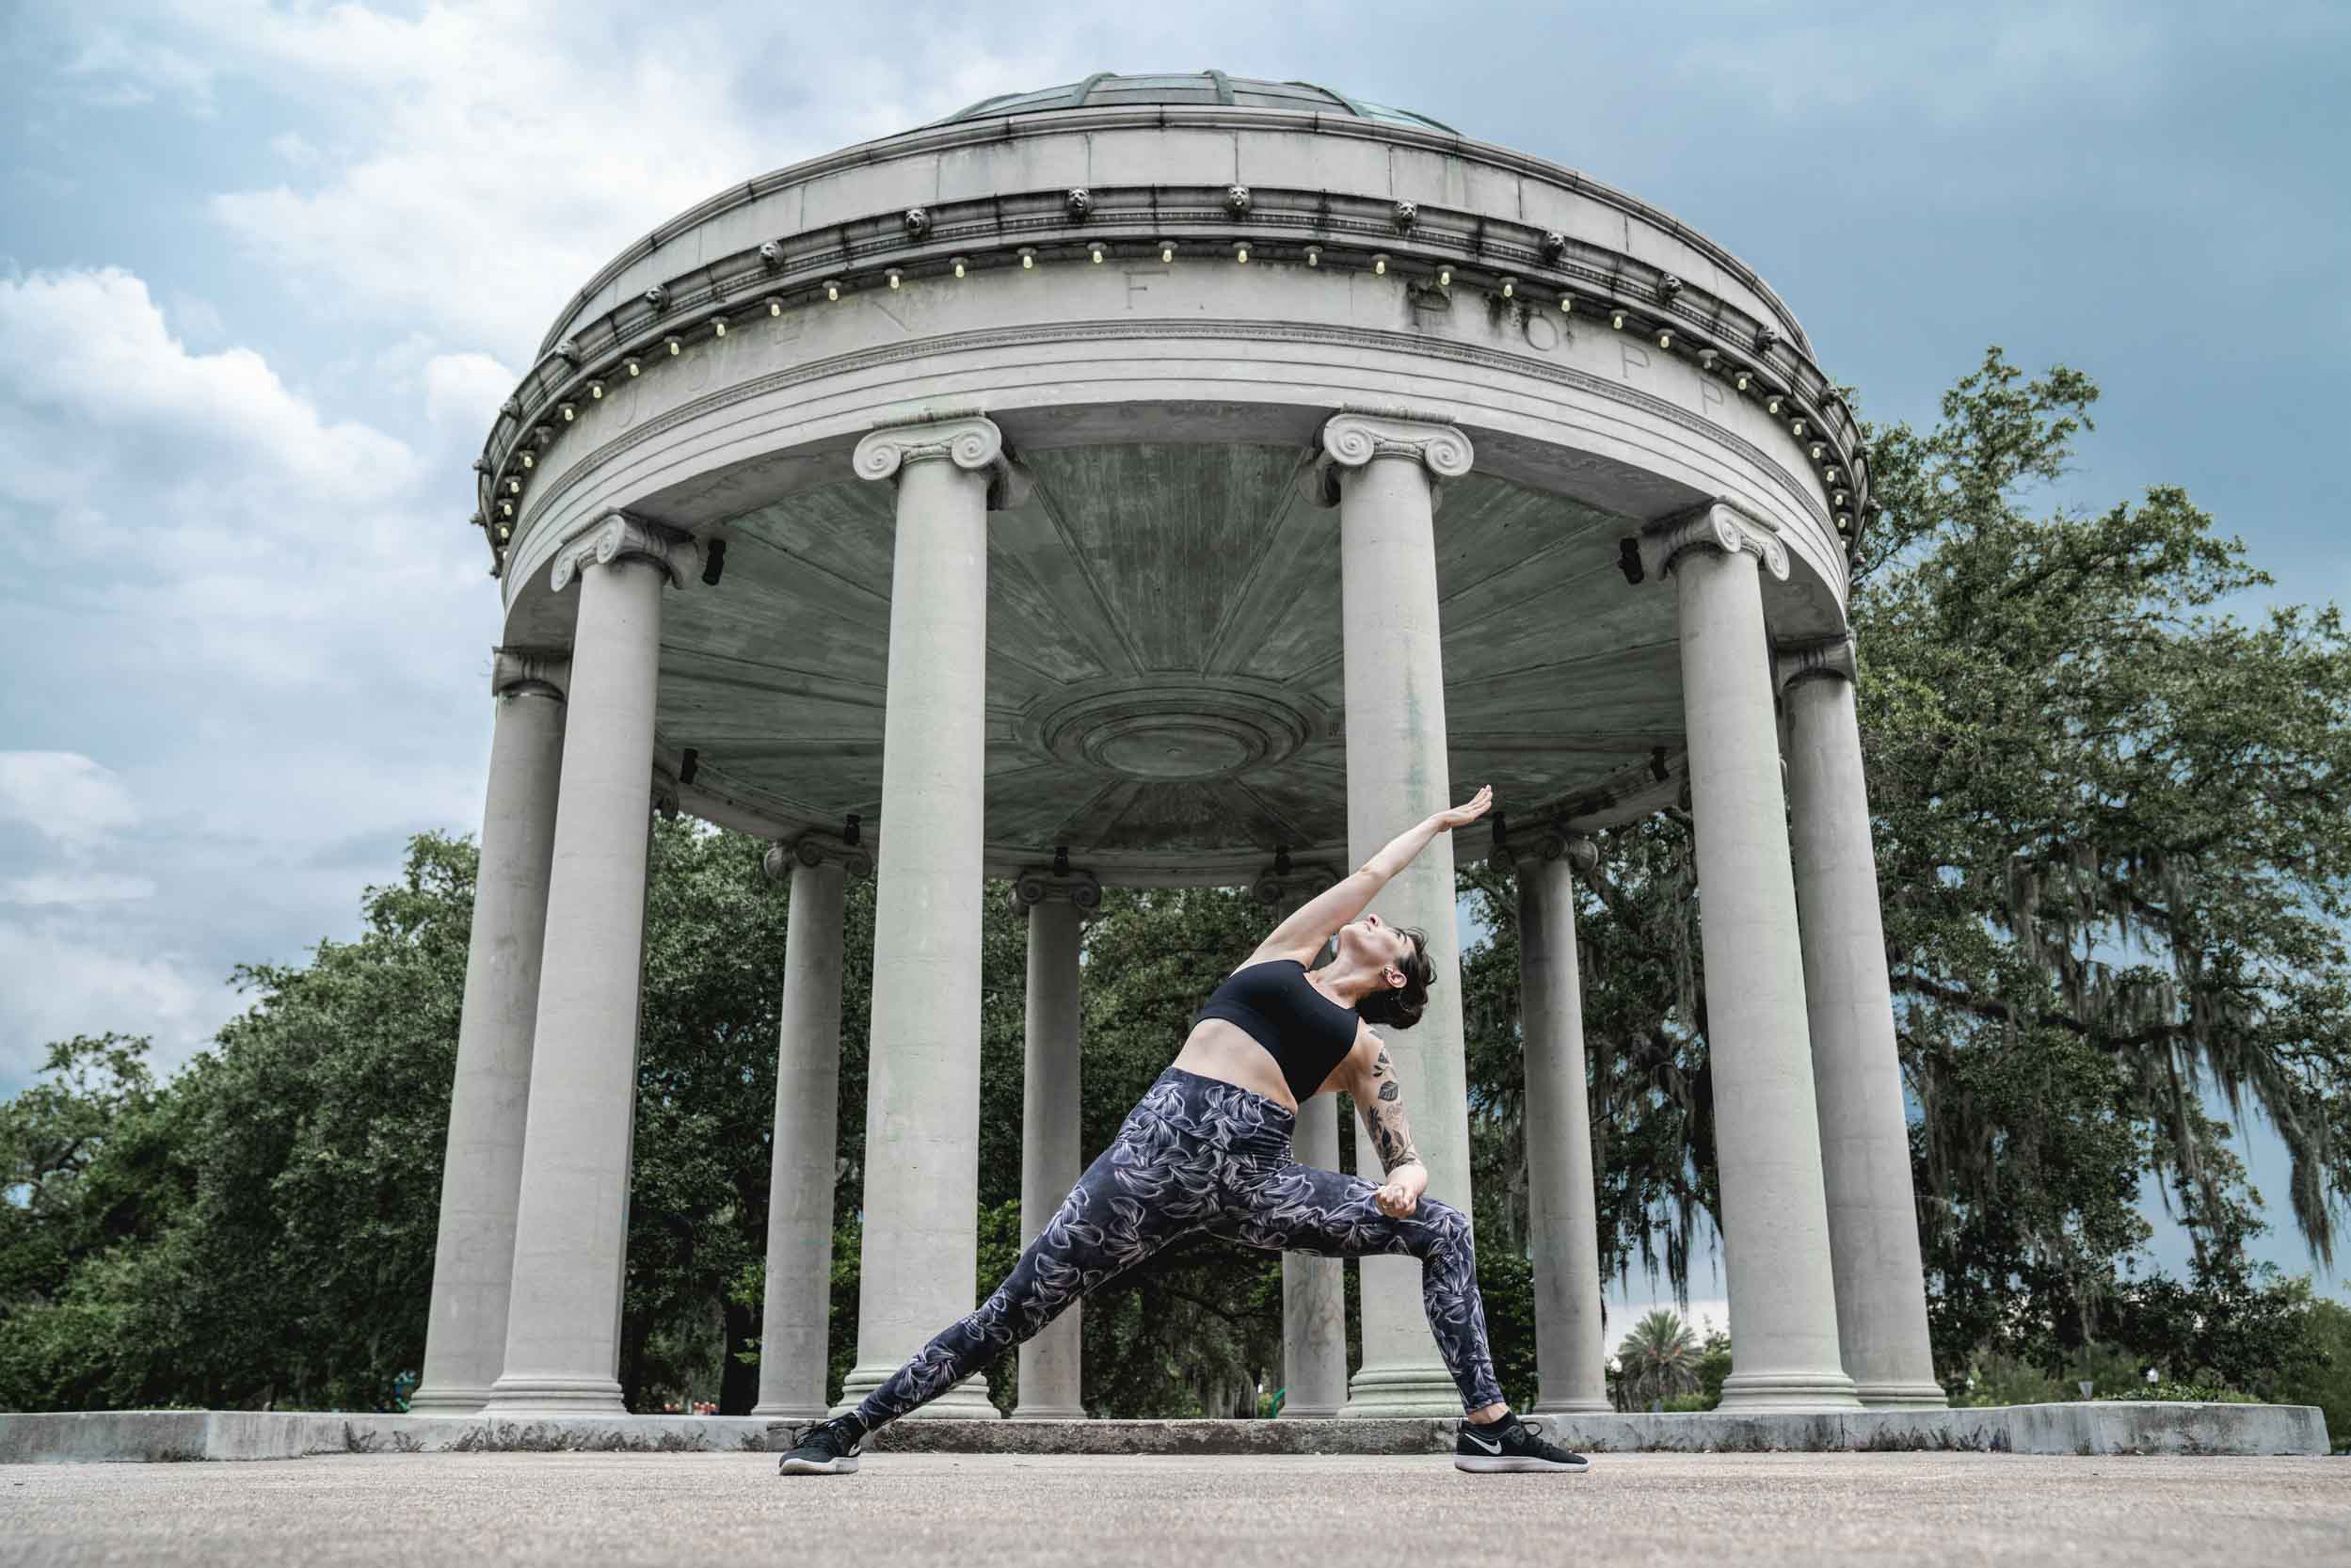 Yoga teacher performing in front of epic monument in New Olreans park